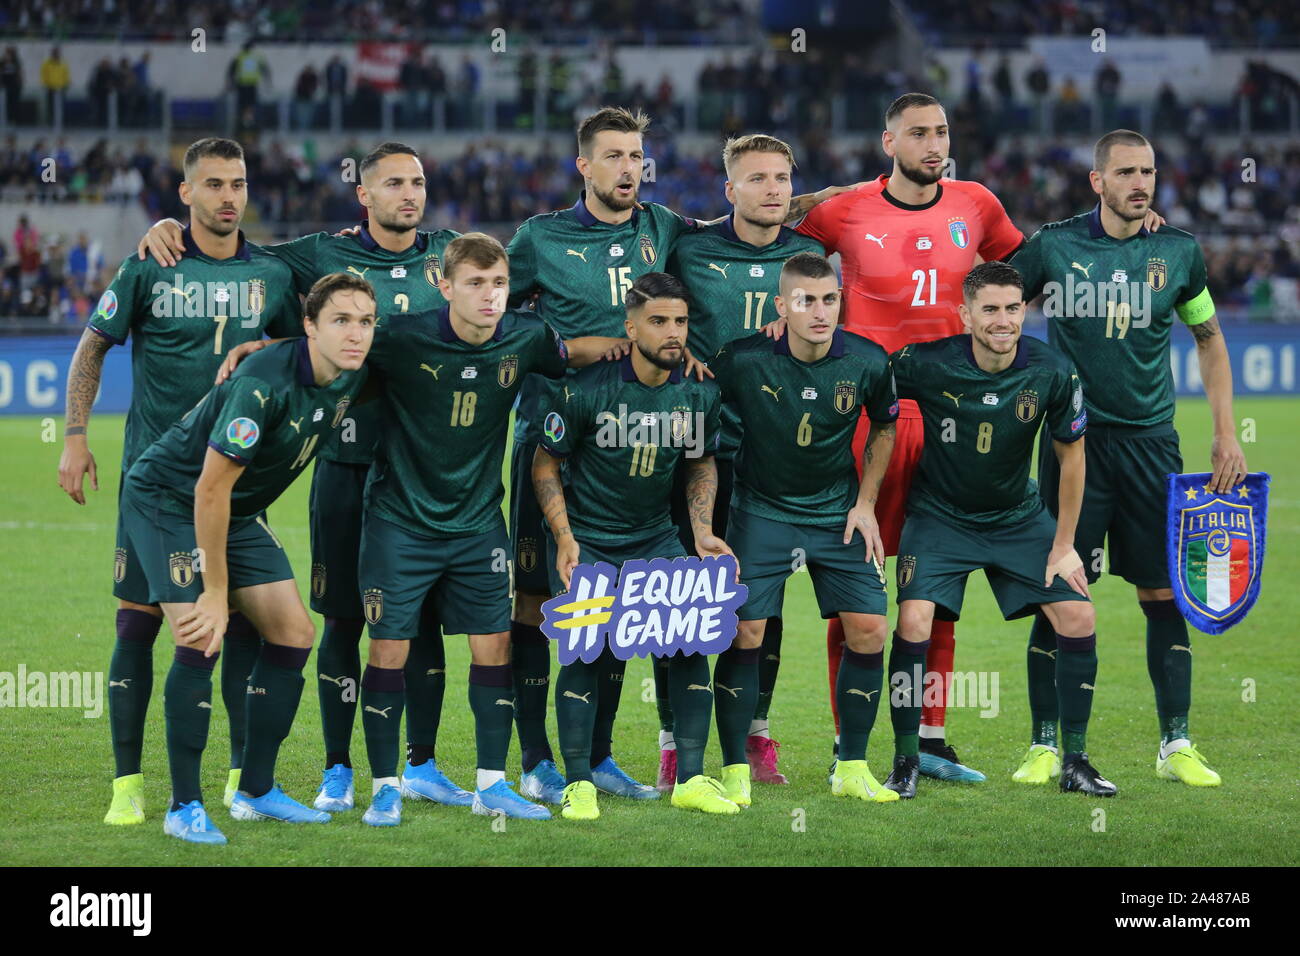 Rome, Italy. 12th Oct, 2019. ROME, ITALY - 12 OCTOBER 2019: Italy team with  green soccer jersey, during the official photo in the UEFA Euro 2020  qualifier match between Italy and Greece,